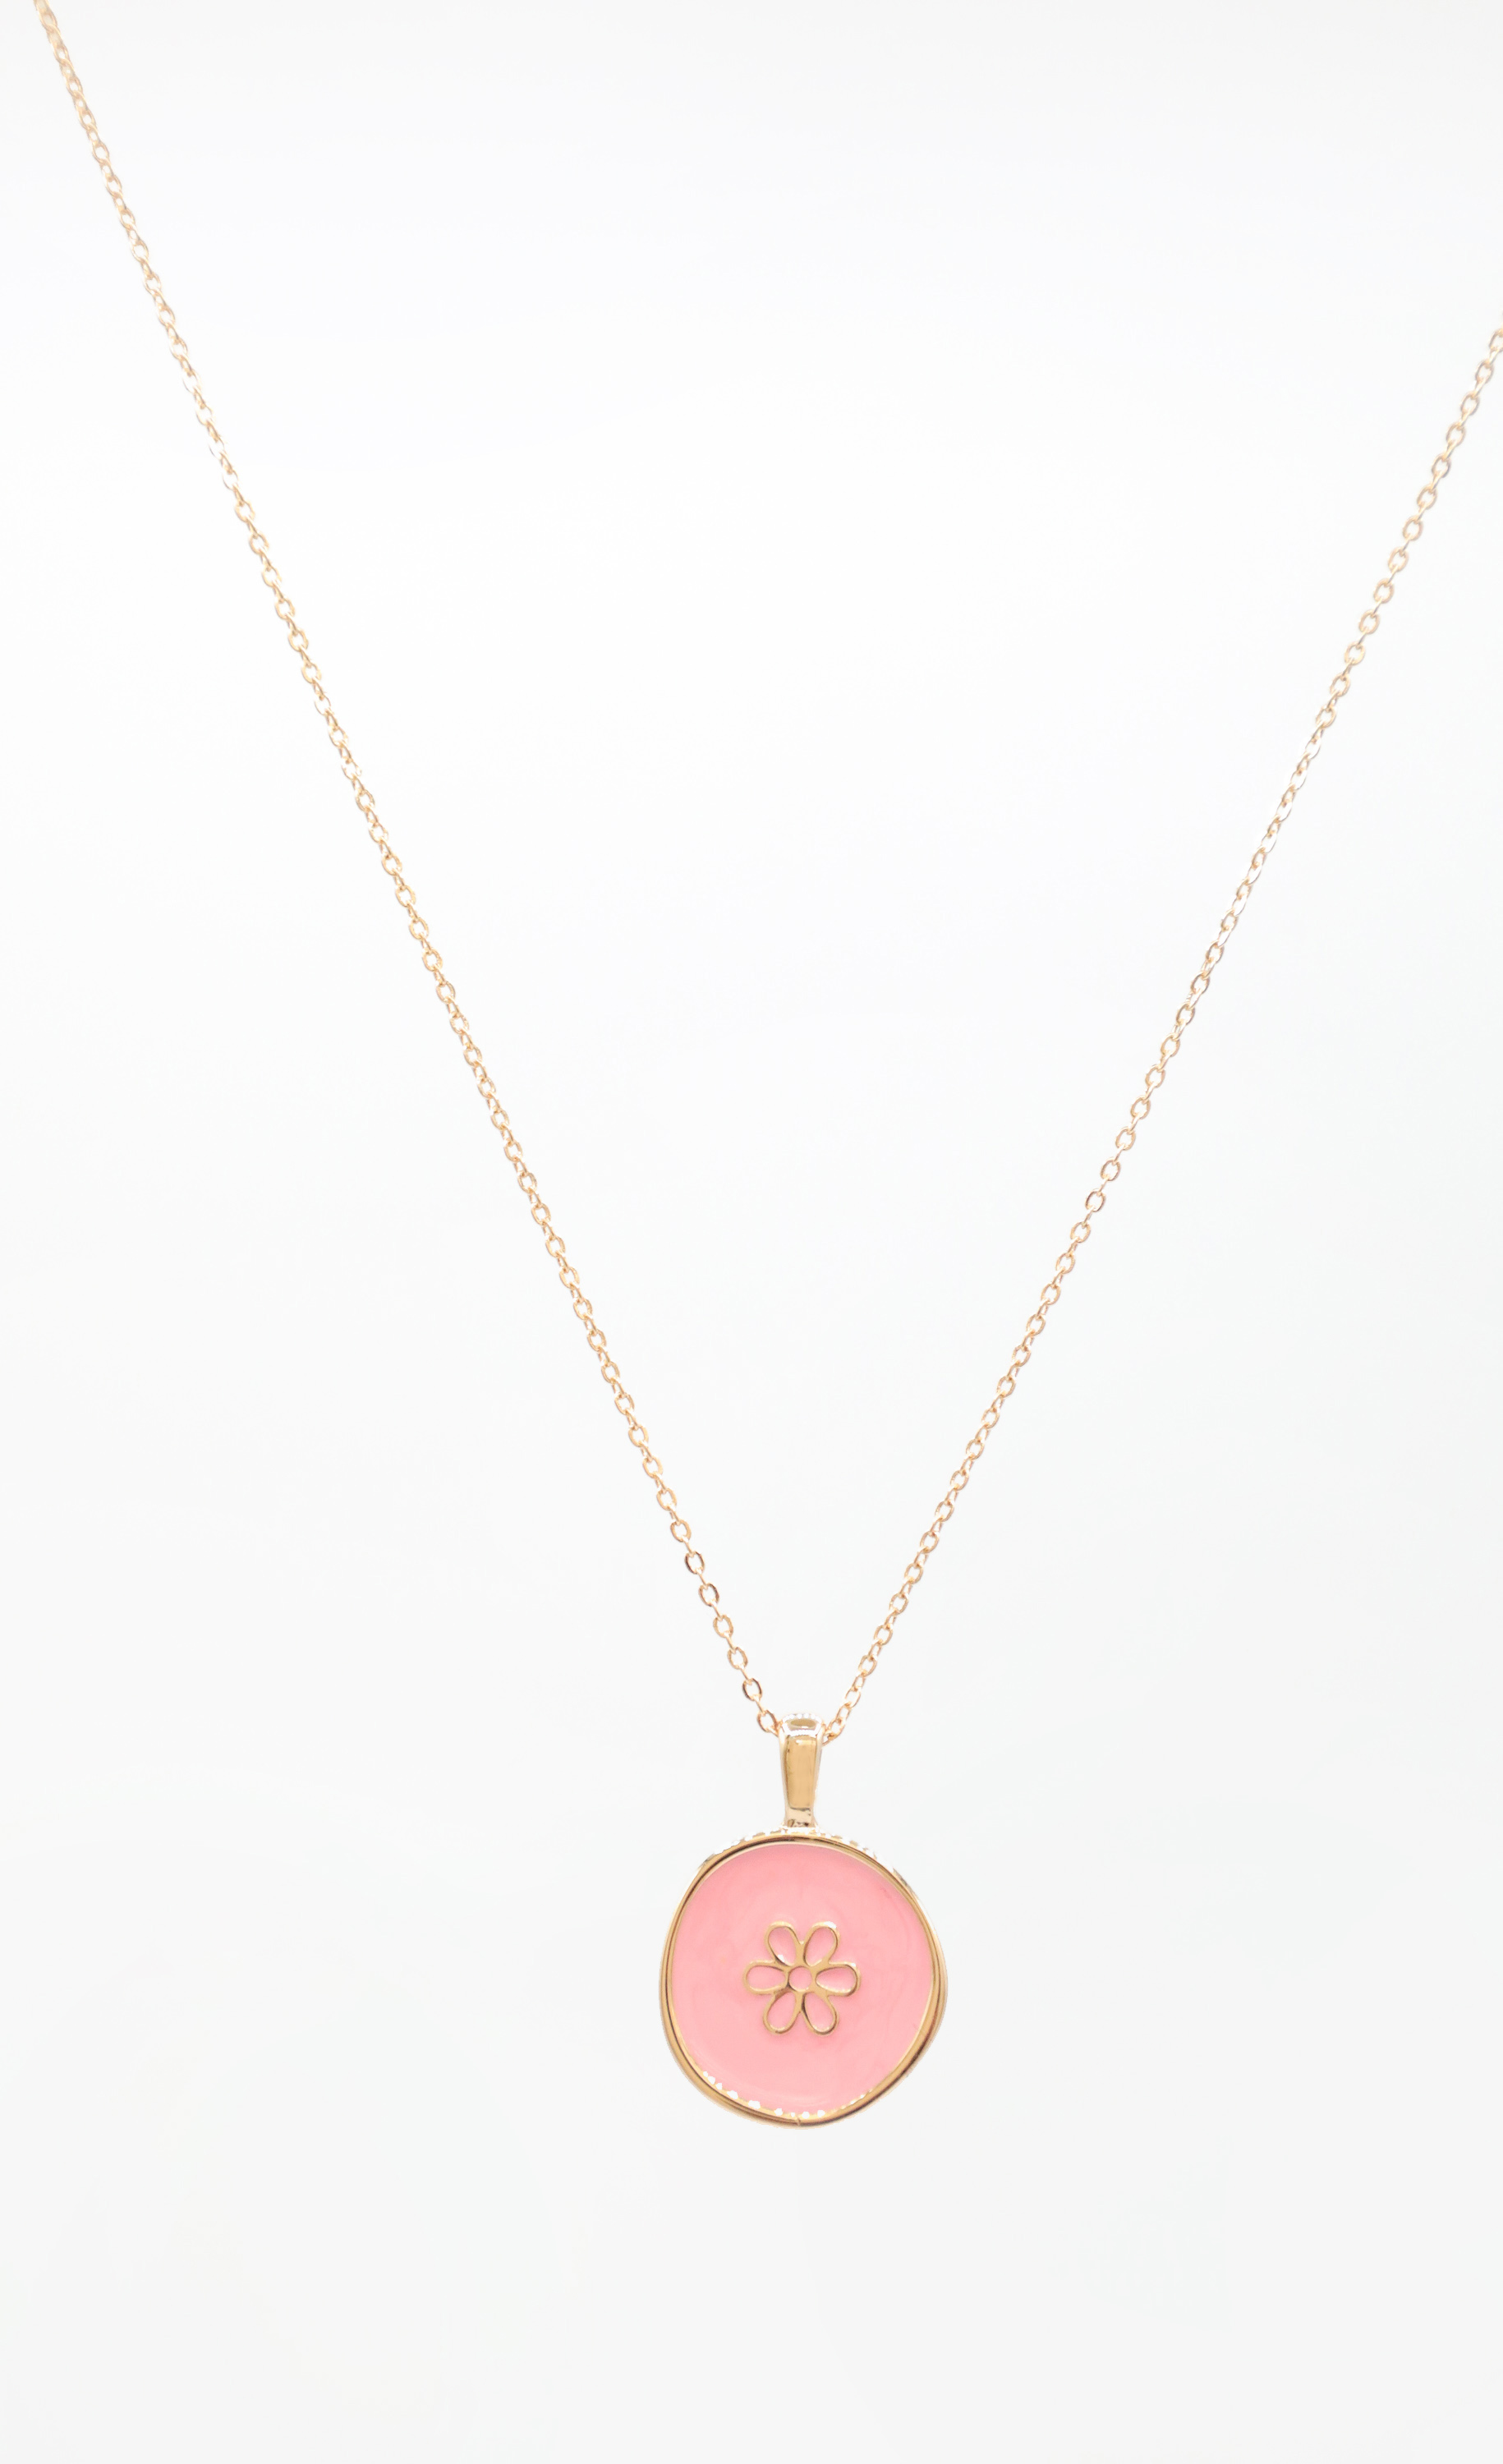 Make A Wish Necklace in Pink